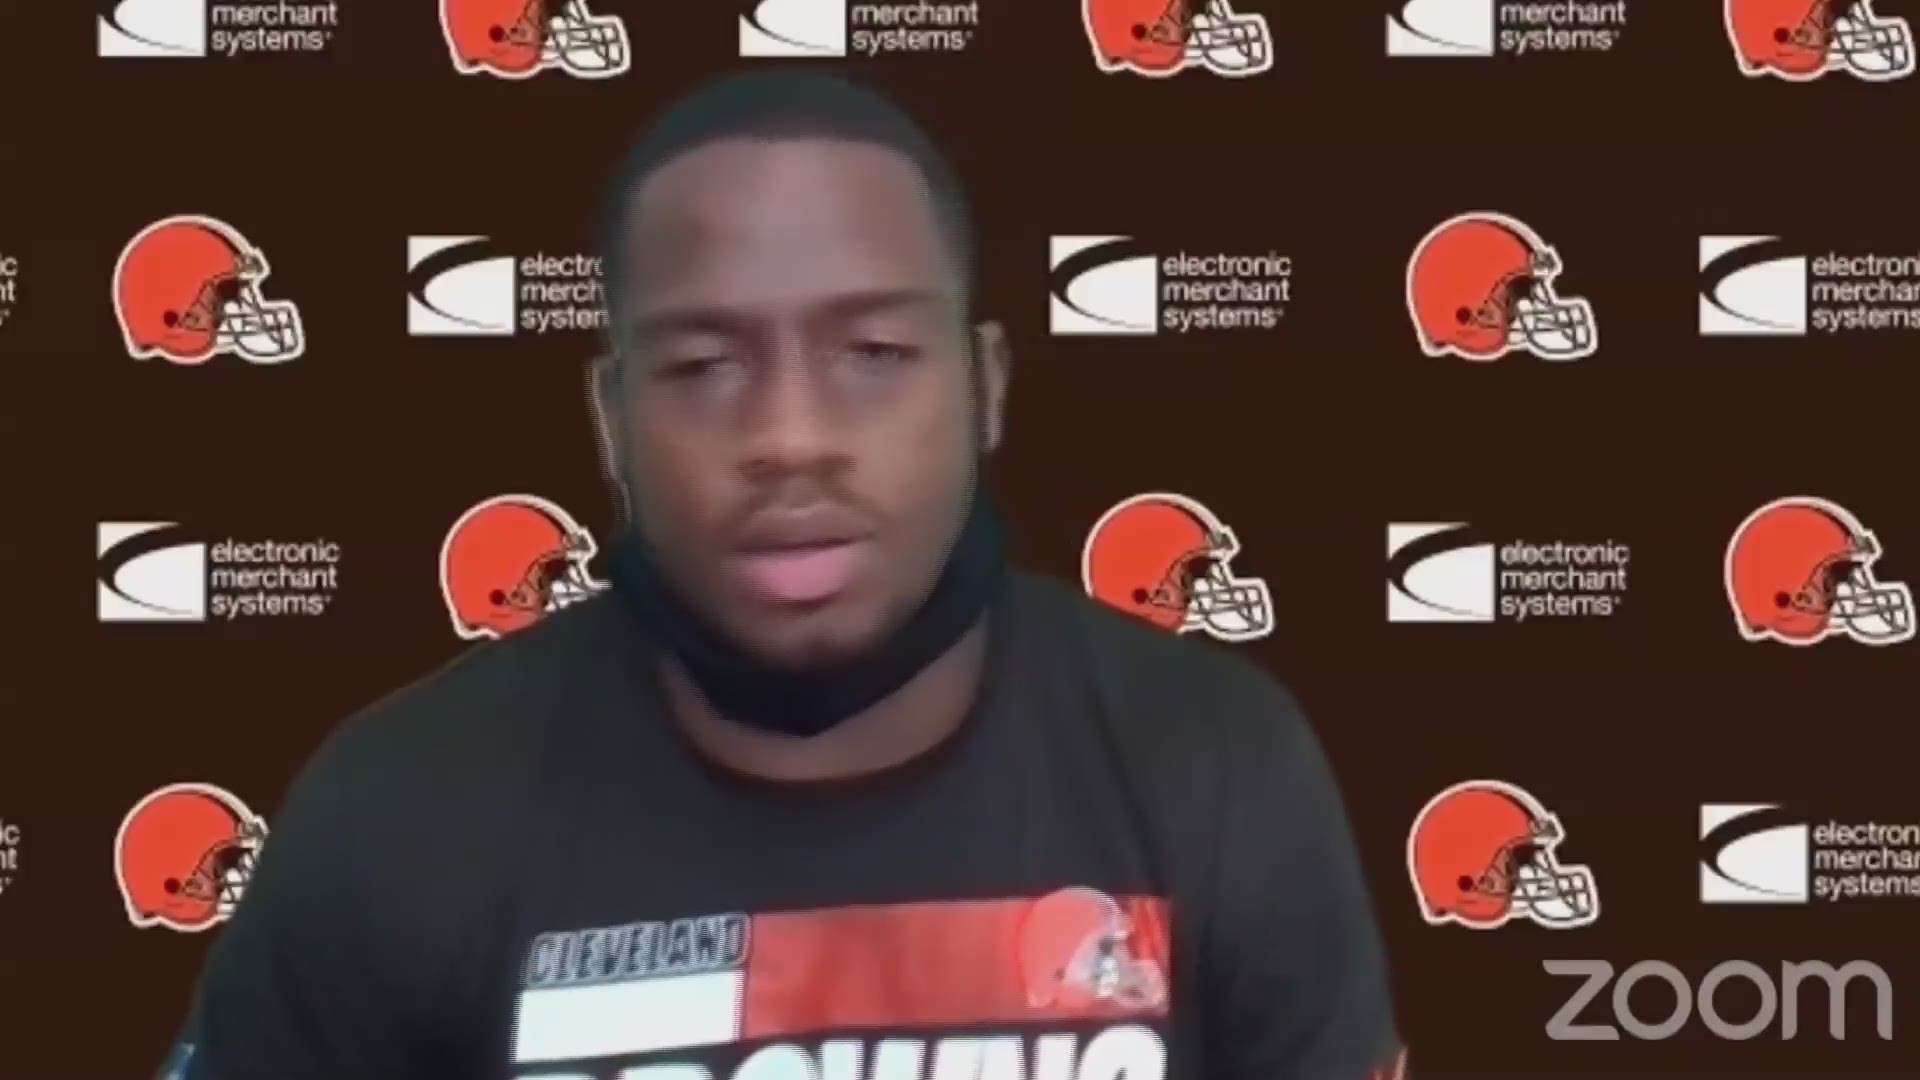 "We need to be 1-1 after this week. There is a little pressure to [win], because you don't want to be 0-2."  Browns face the Bengals on Thursday Night Football.